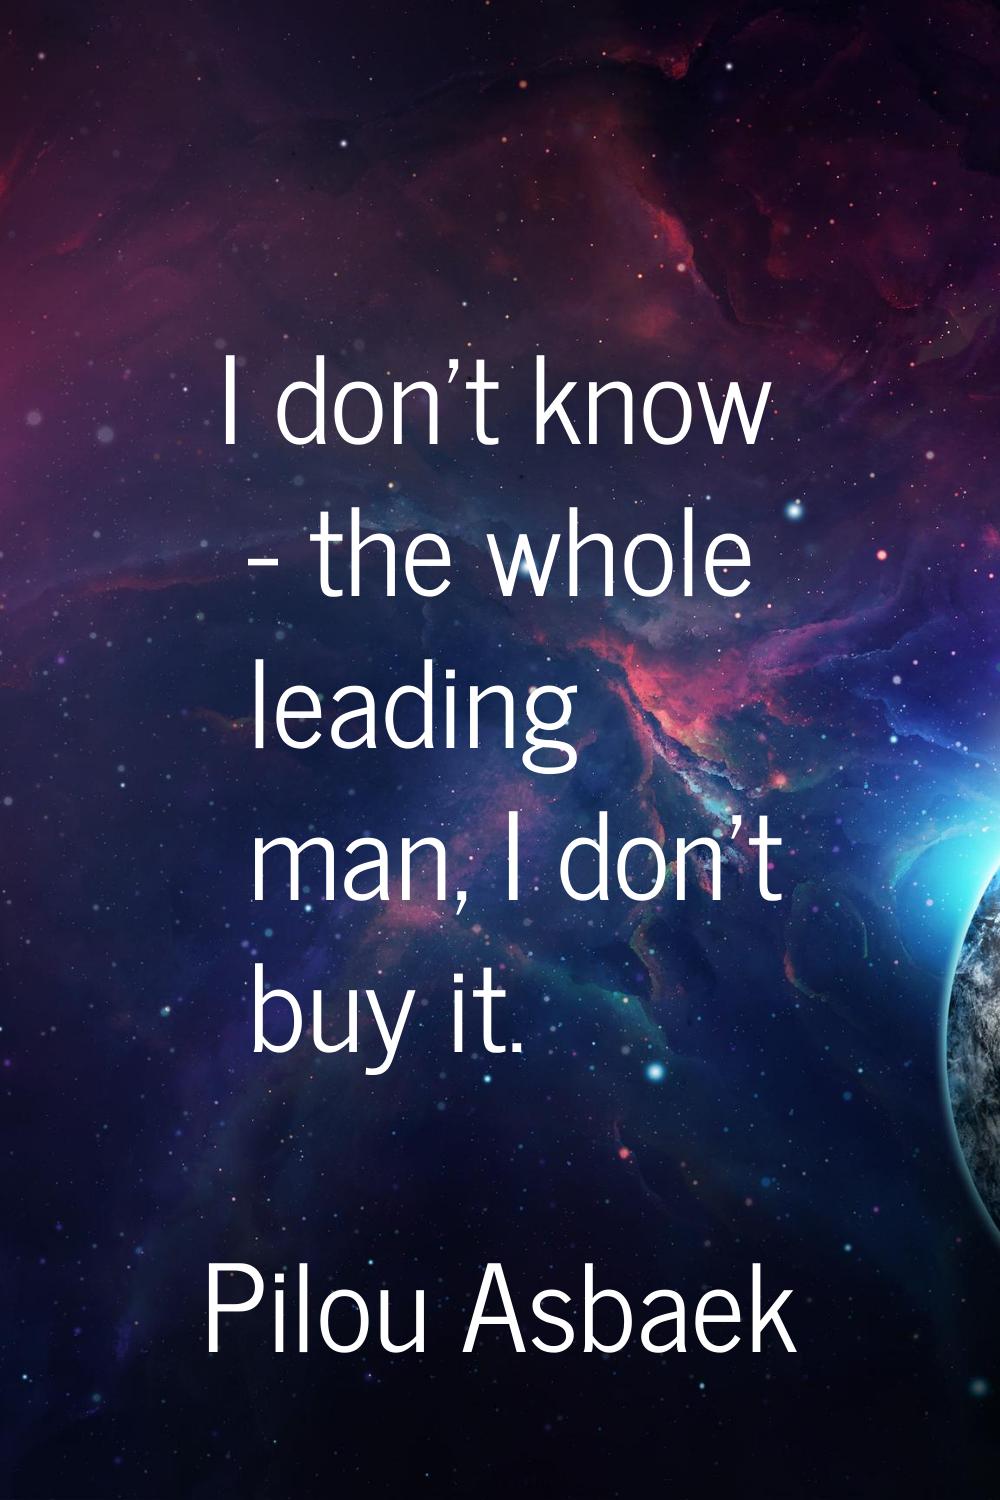 I don't know - the whole leading man, I don't buy it.